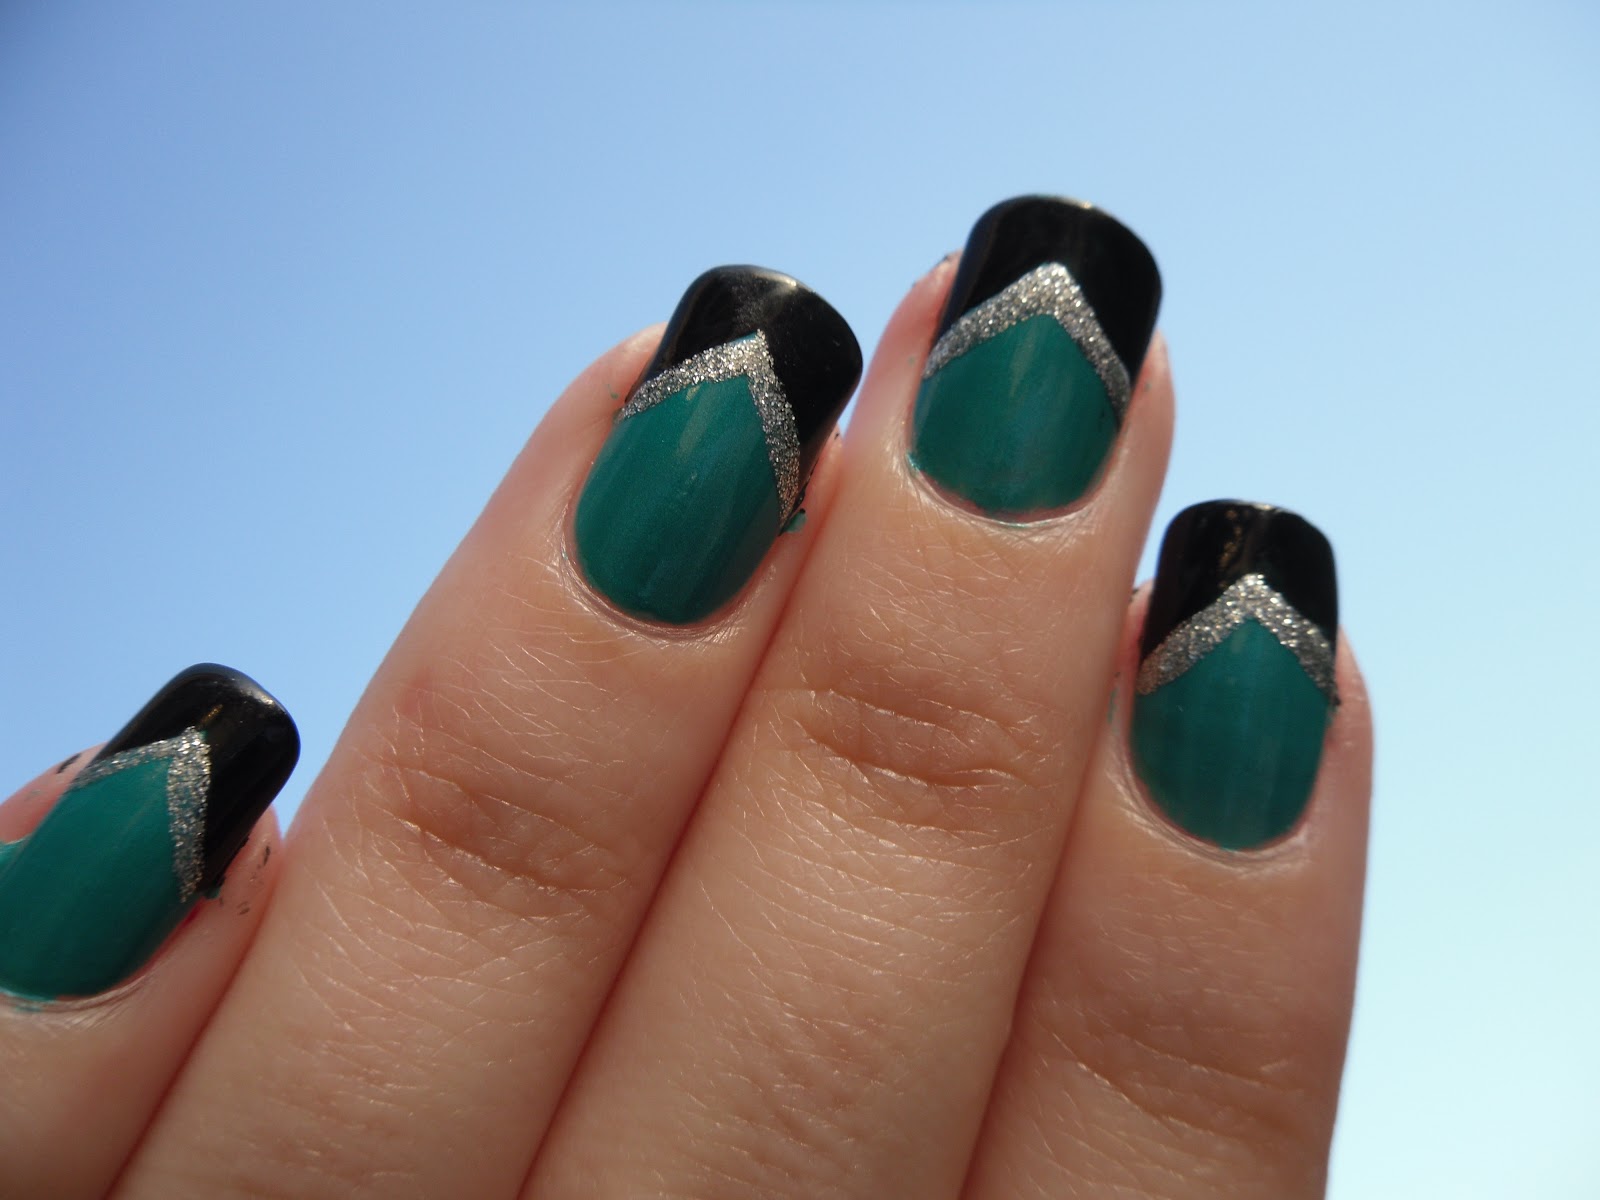 5. 20+ Teal Nail Designs for a Chic and Trendy Look - wide 4